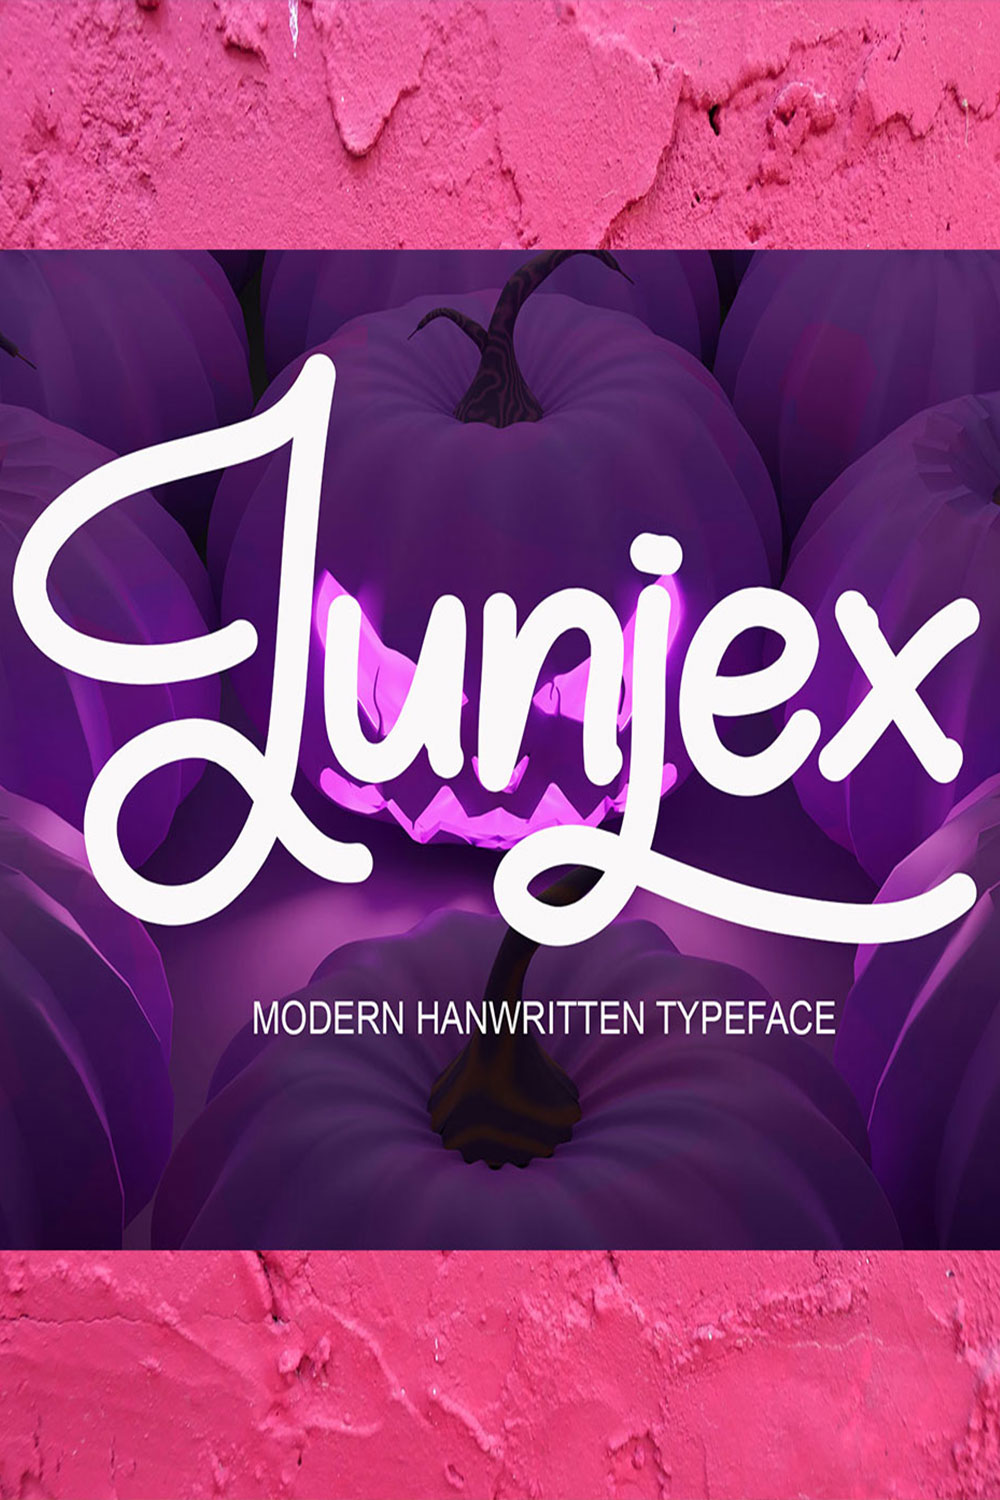 An image with text showing the irresistible Junjex font.